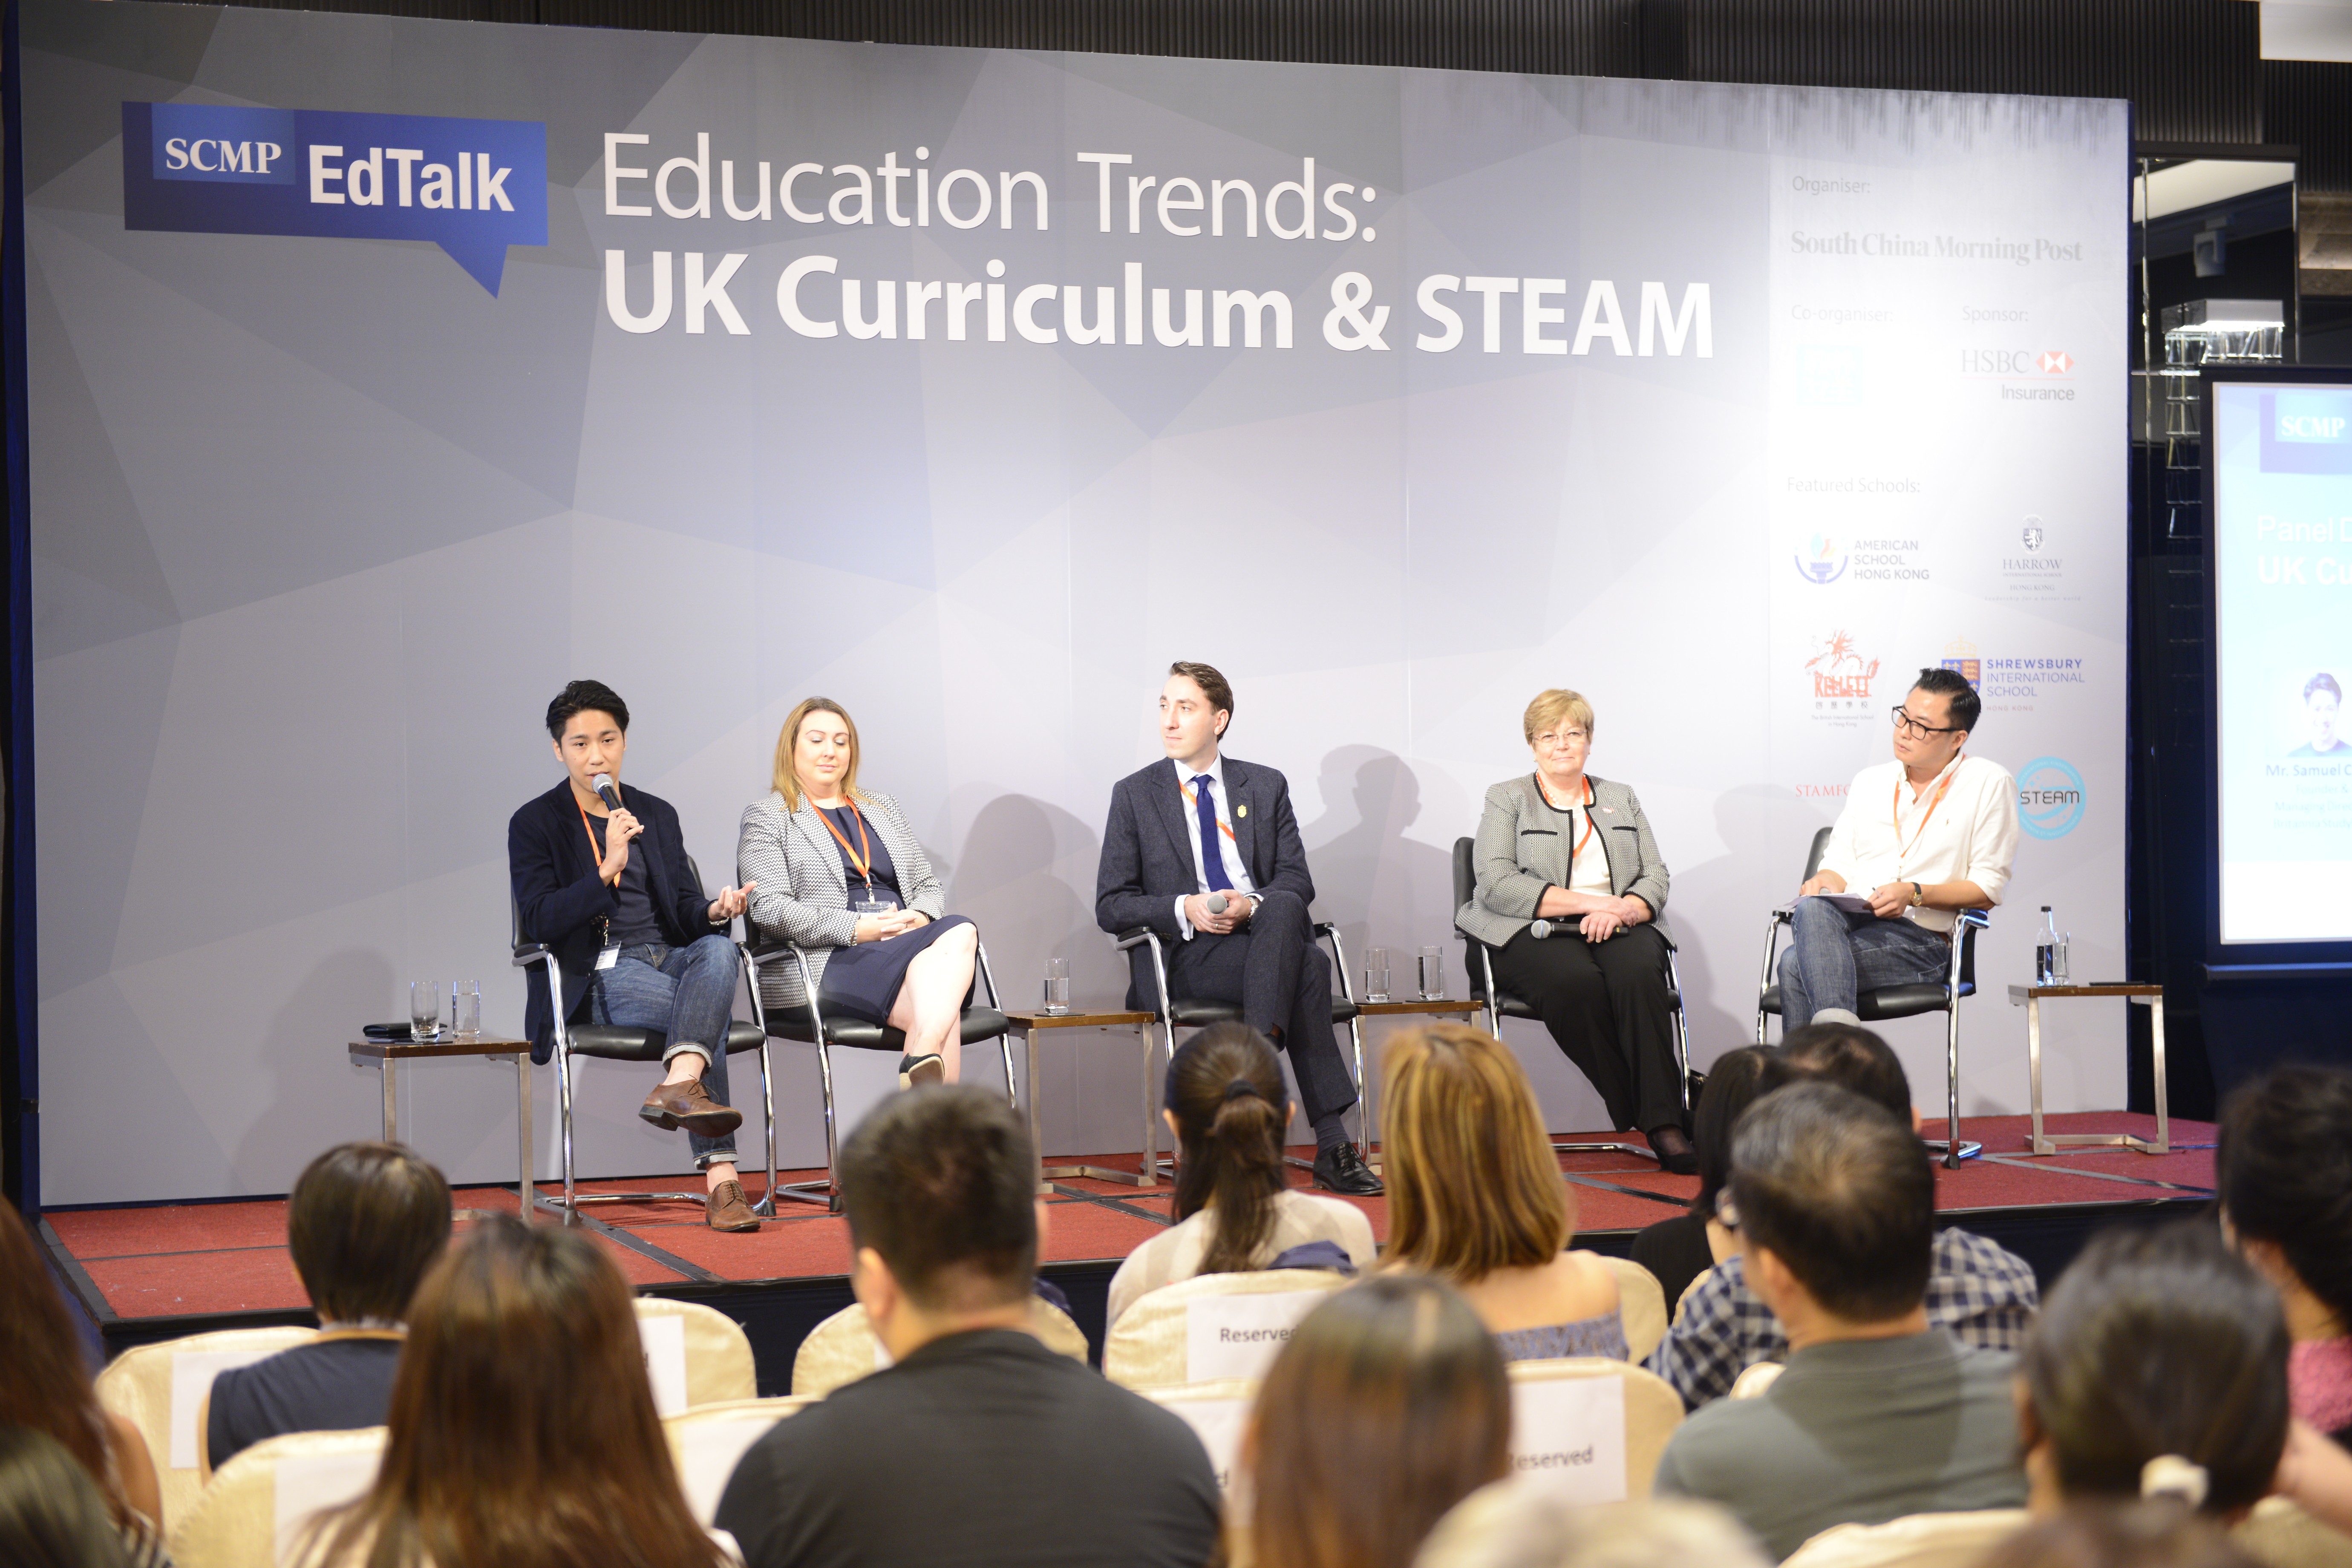 The EdTalk organised by SCMP is a forum series that brings together educators and parents to share insights and experience.